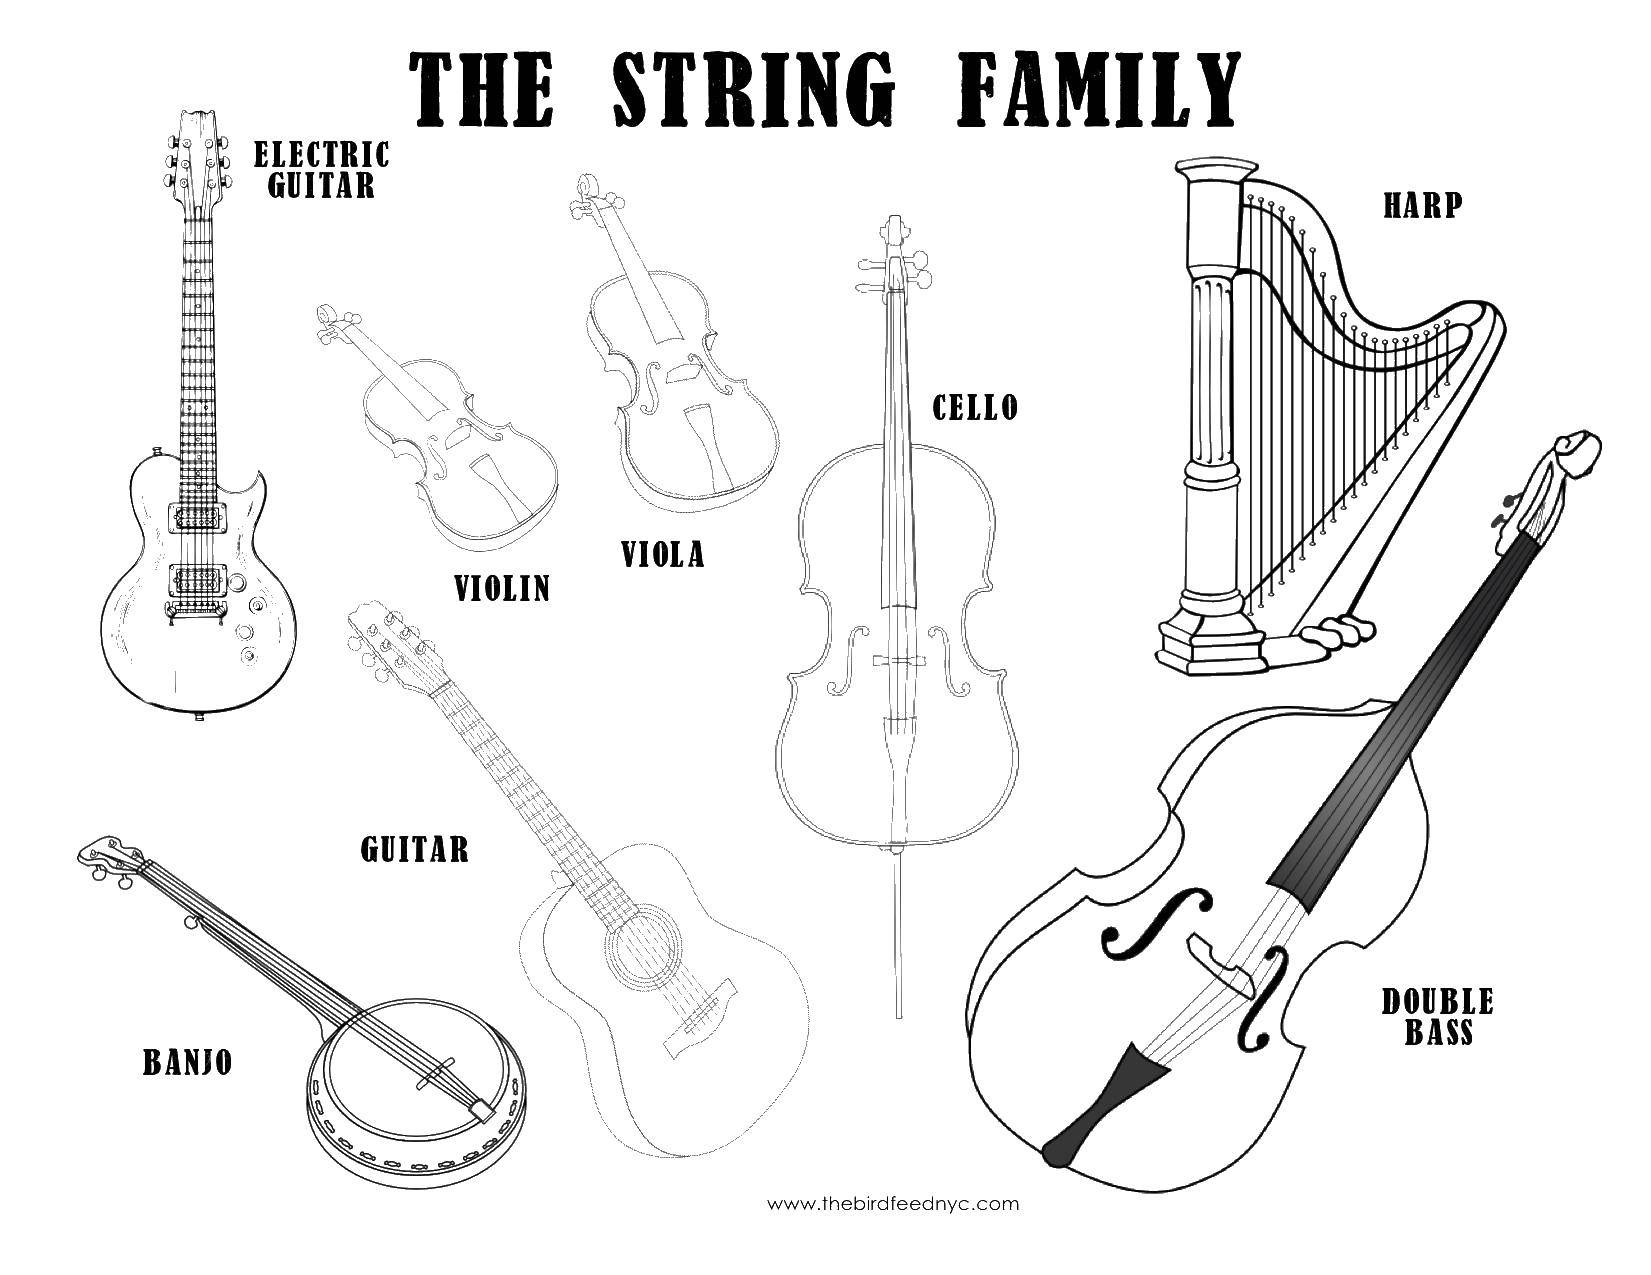 Coloring Stringed musical instruments. Category Music. Tags:  Musical instruments, string.